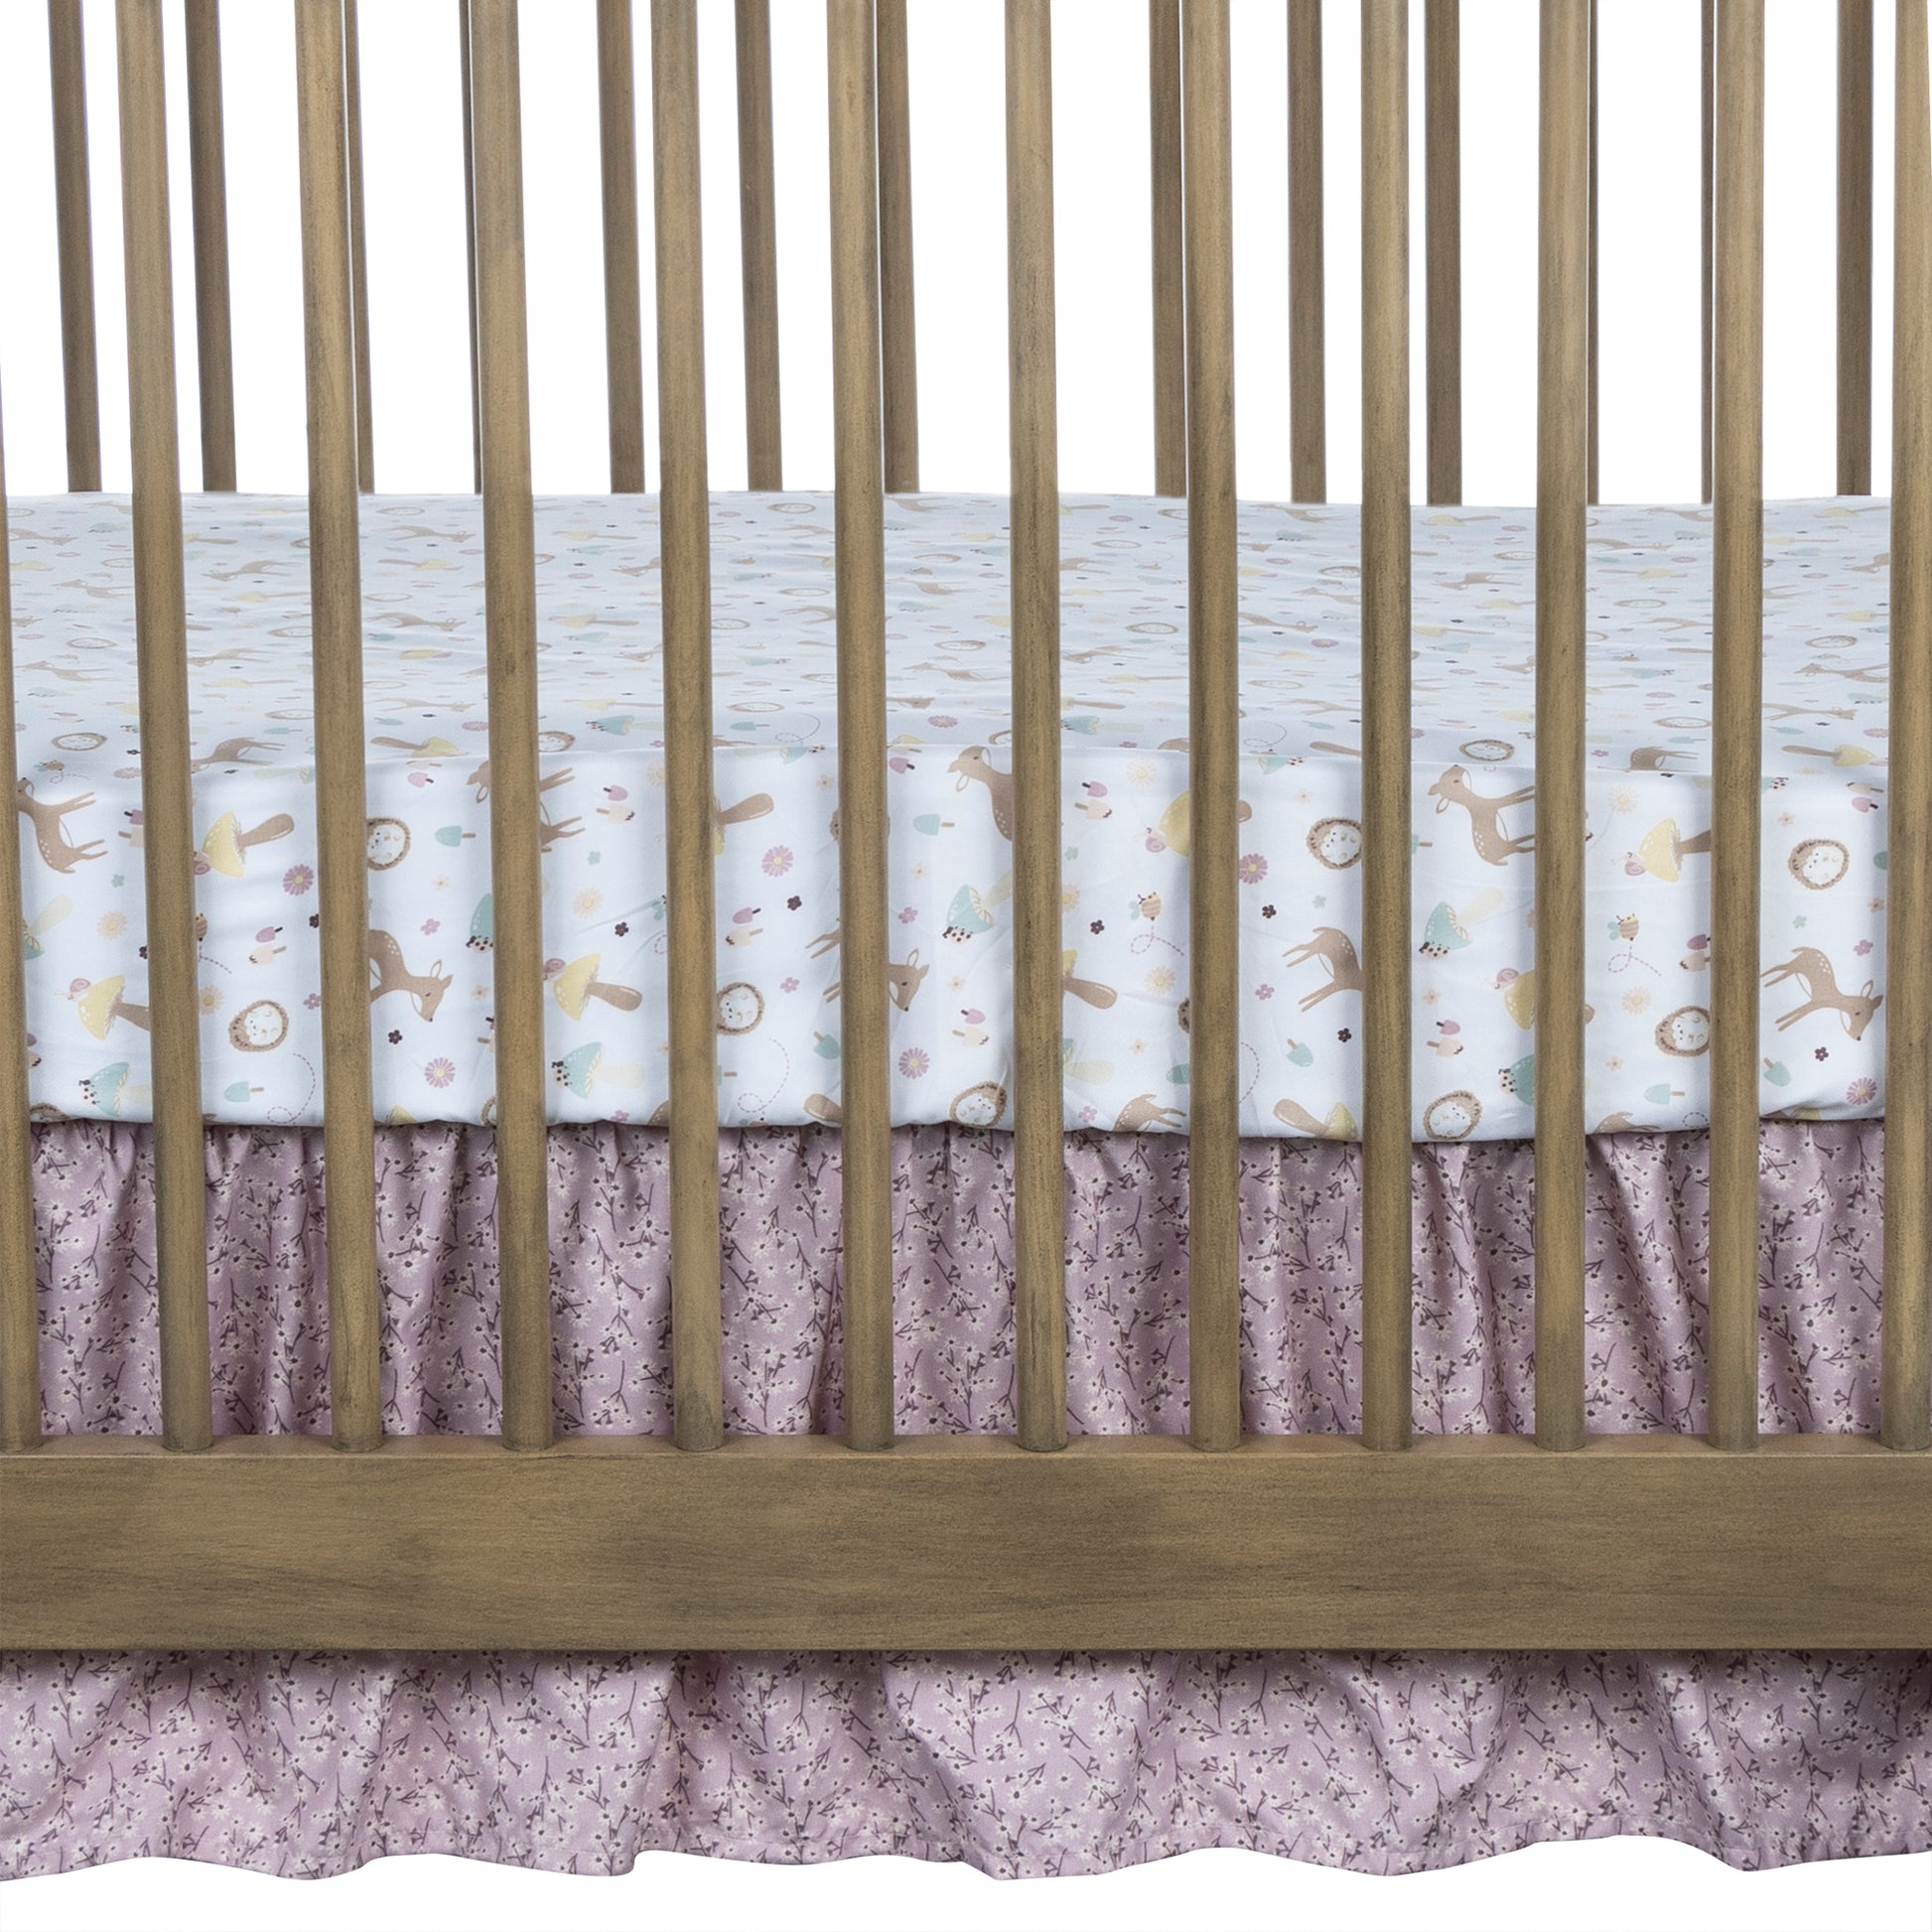 Enchanted Garden 4 Piece Crib Bedding Set by Sammy & Lou®; crib skirt features a lilac floral scatter print.